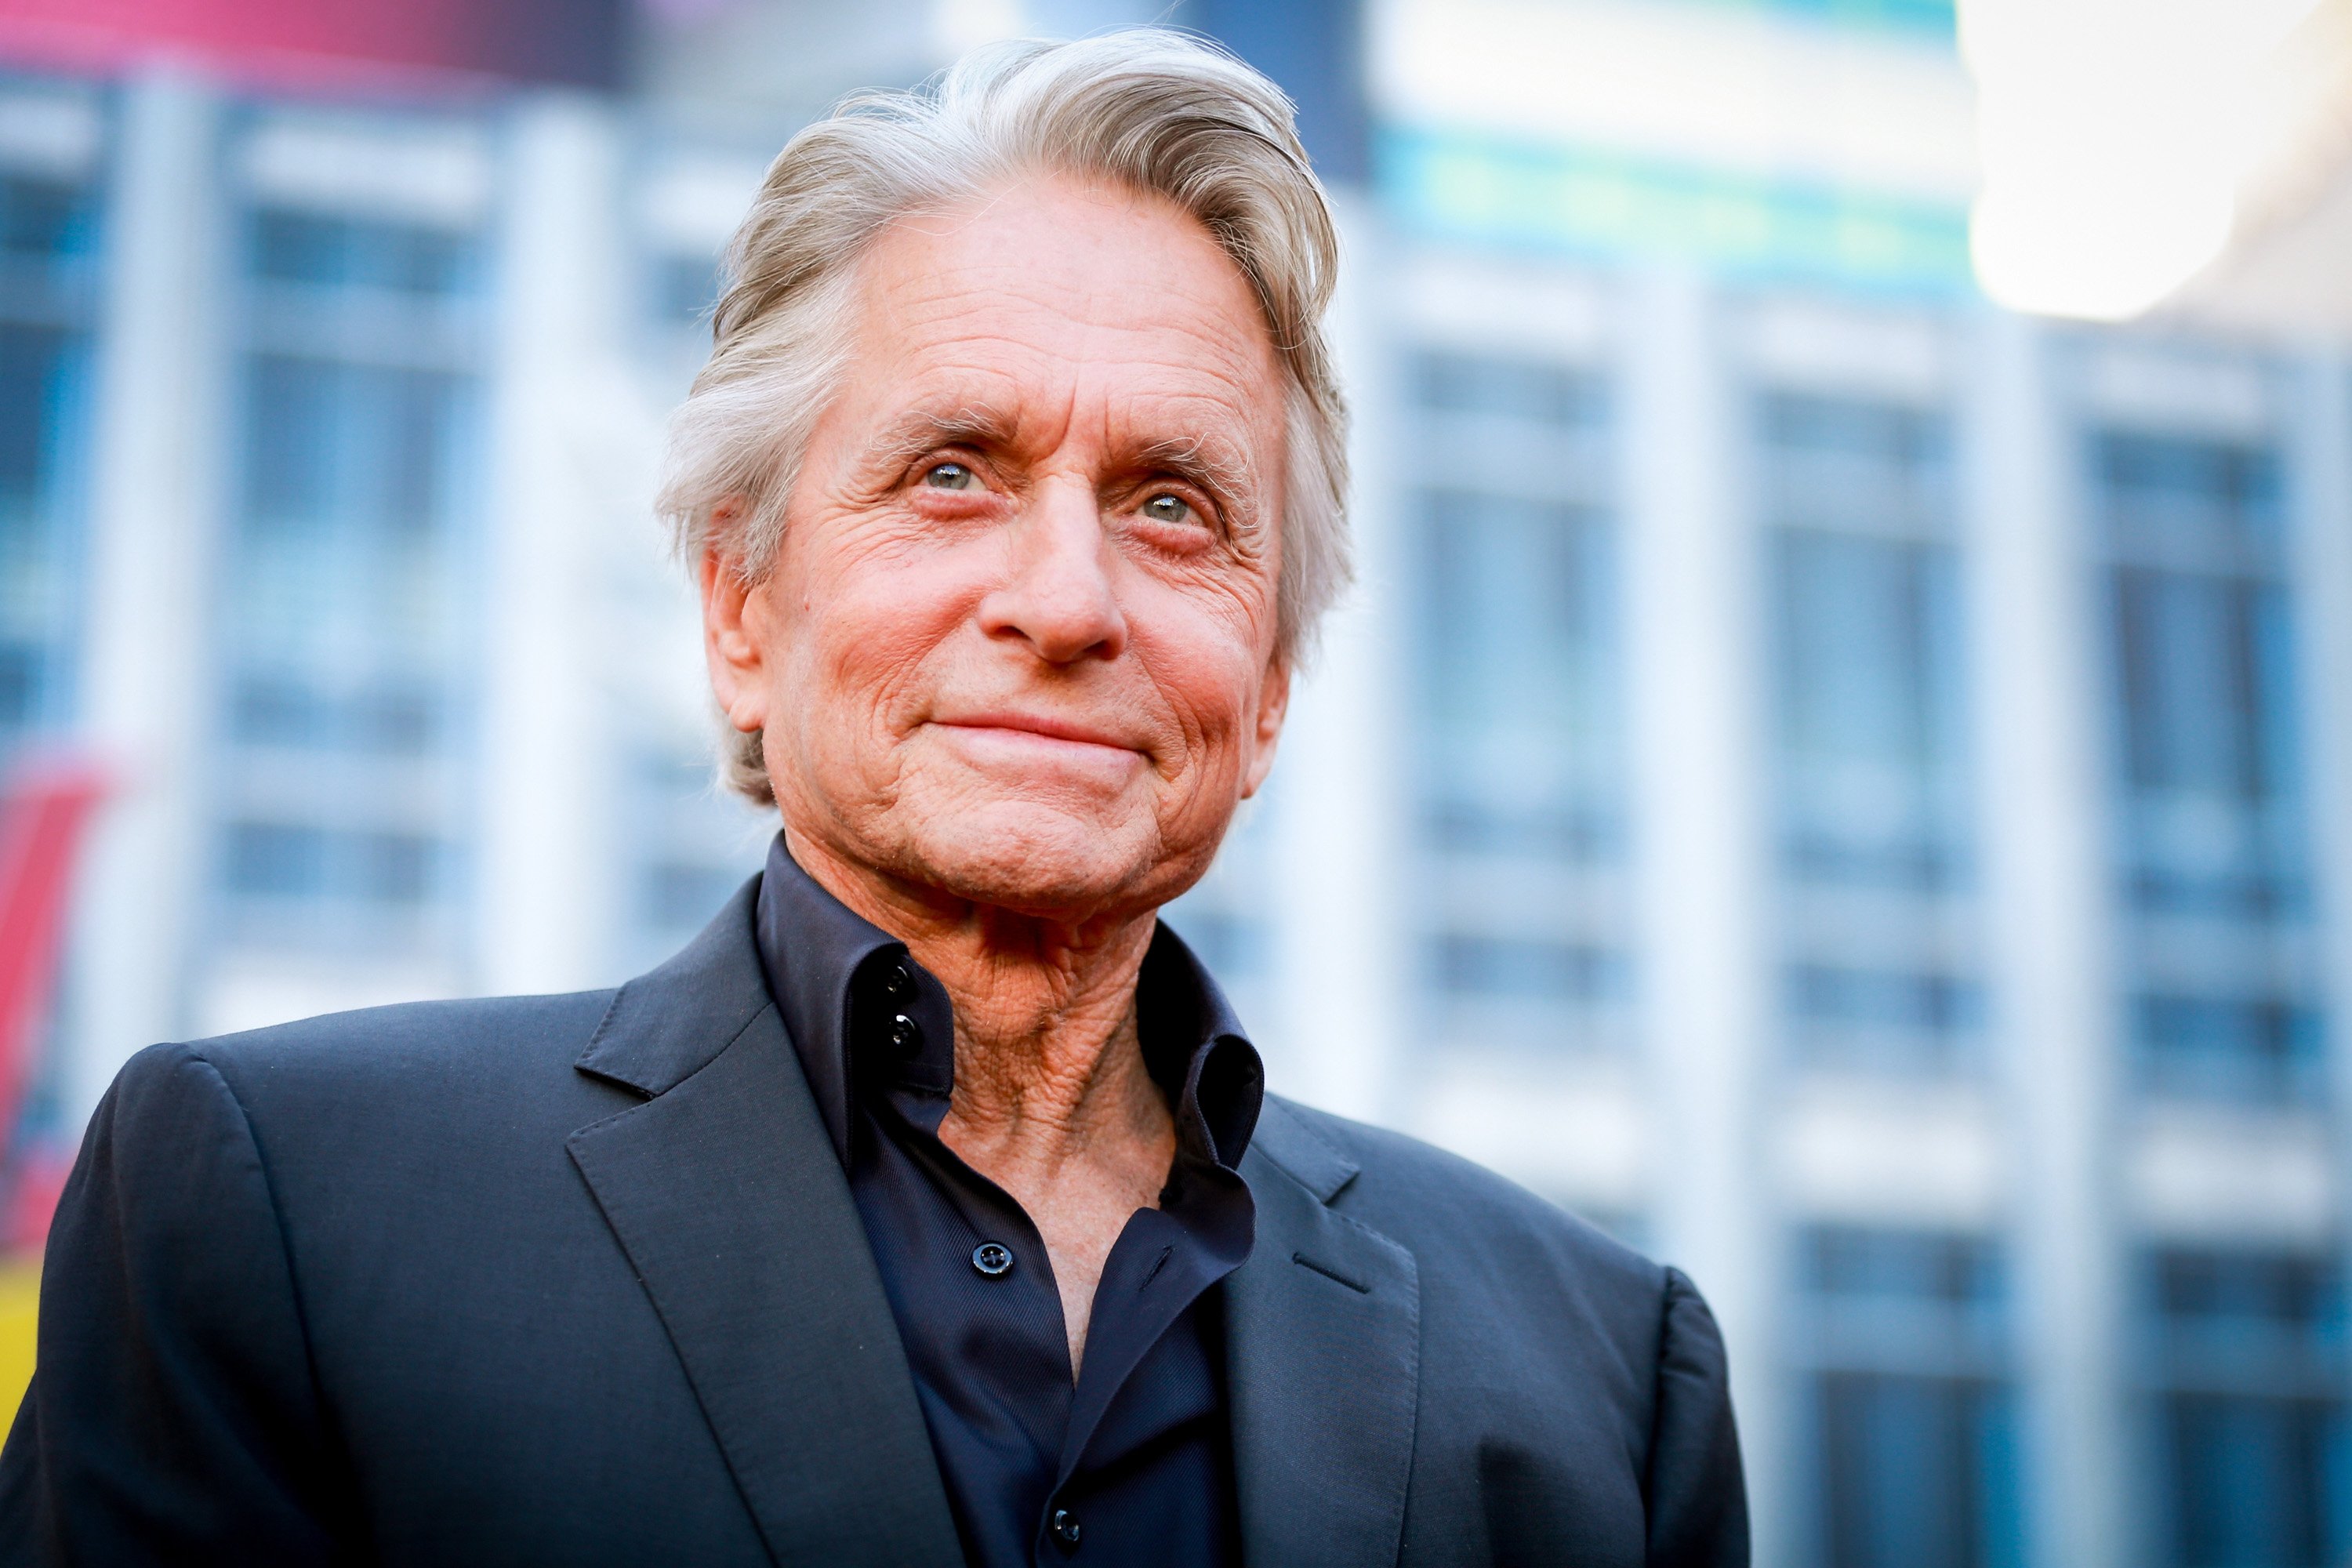 Michael Douglas attends the premiere of Disney And Marvel's 'Ant-Man And The Wasp' on June 25, 2018, in Hollywood, California. | Source: Getty Images.